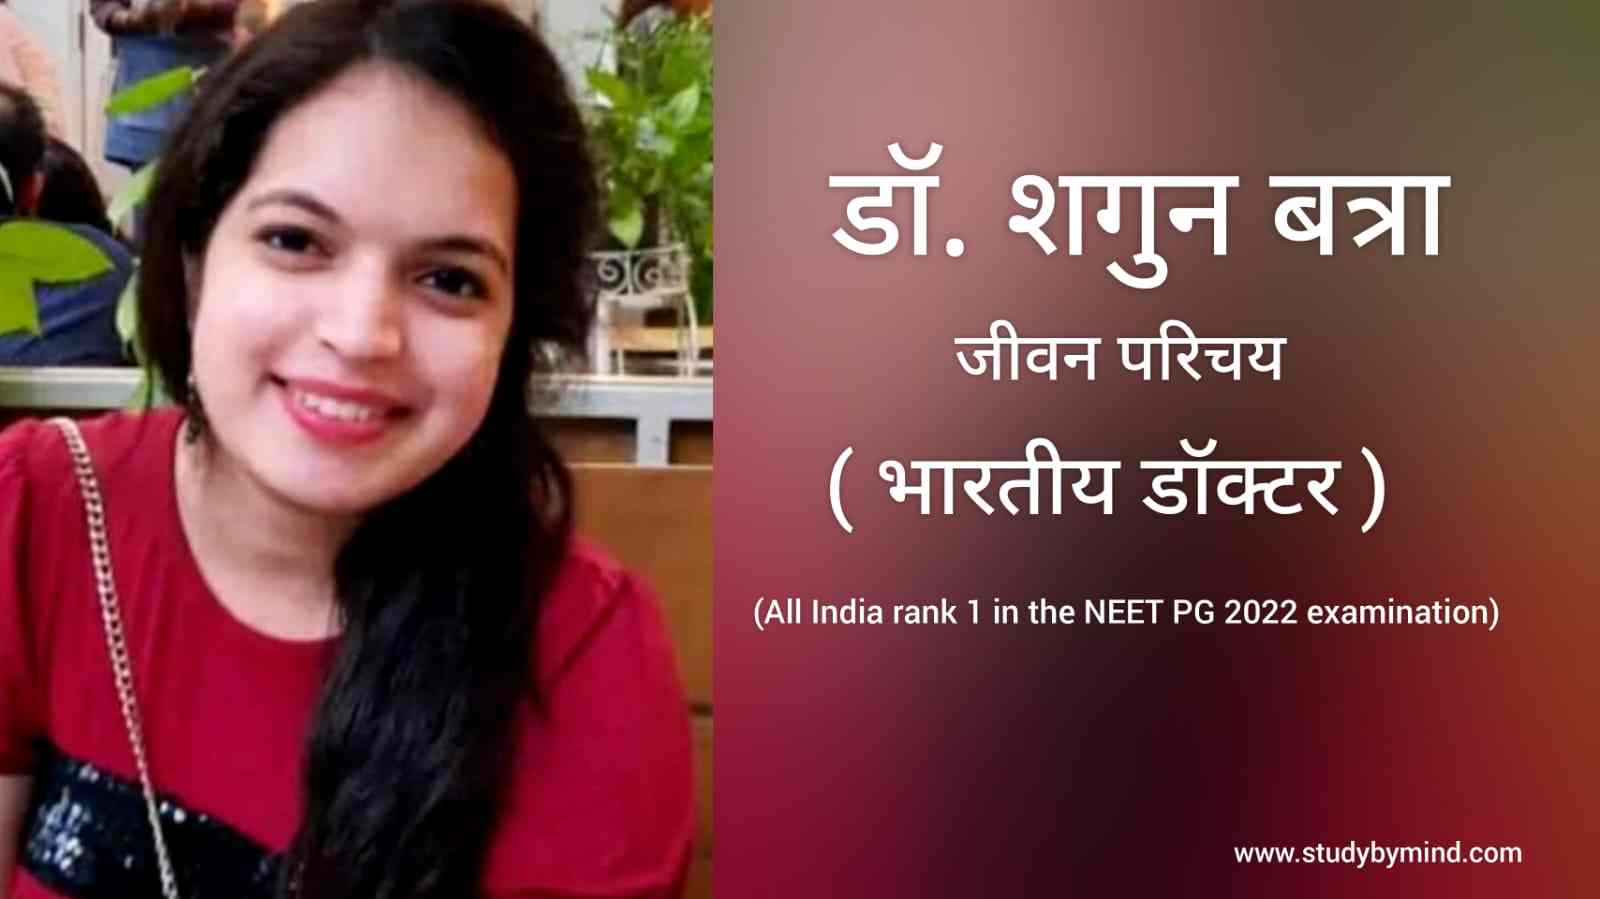 You are currently viewing डॉ शगुन बत्रा जीवन परिचय Dr. Shagun Batra biography in Hindi (NEET PG Topper 2022)